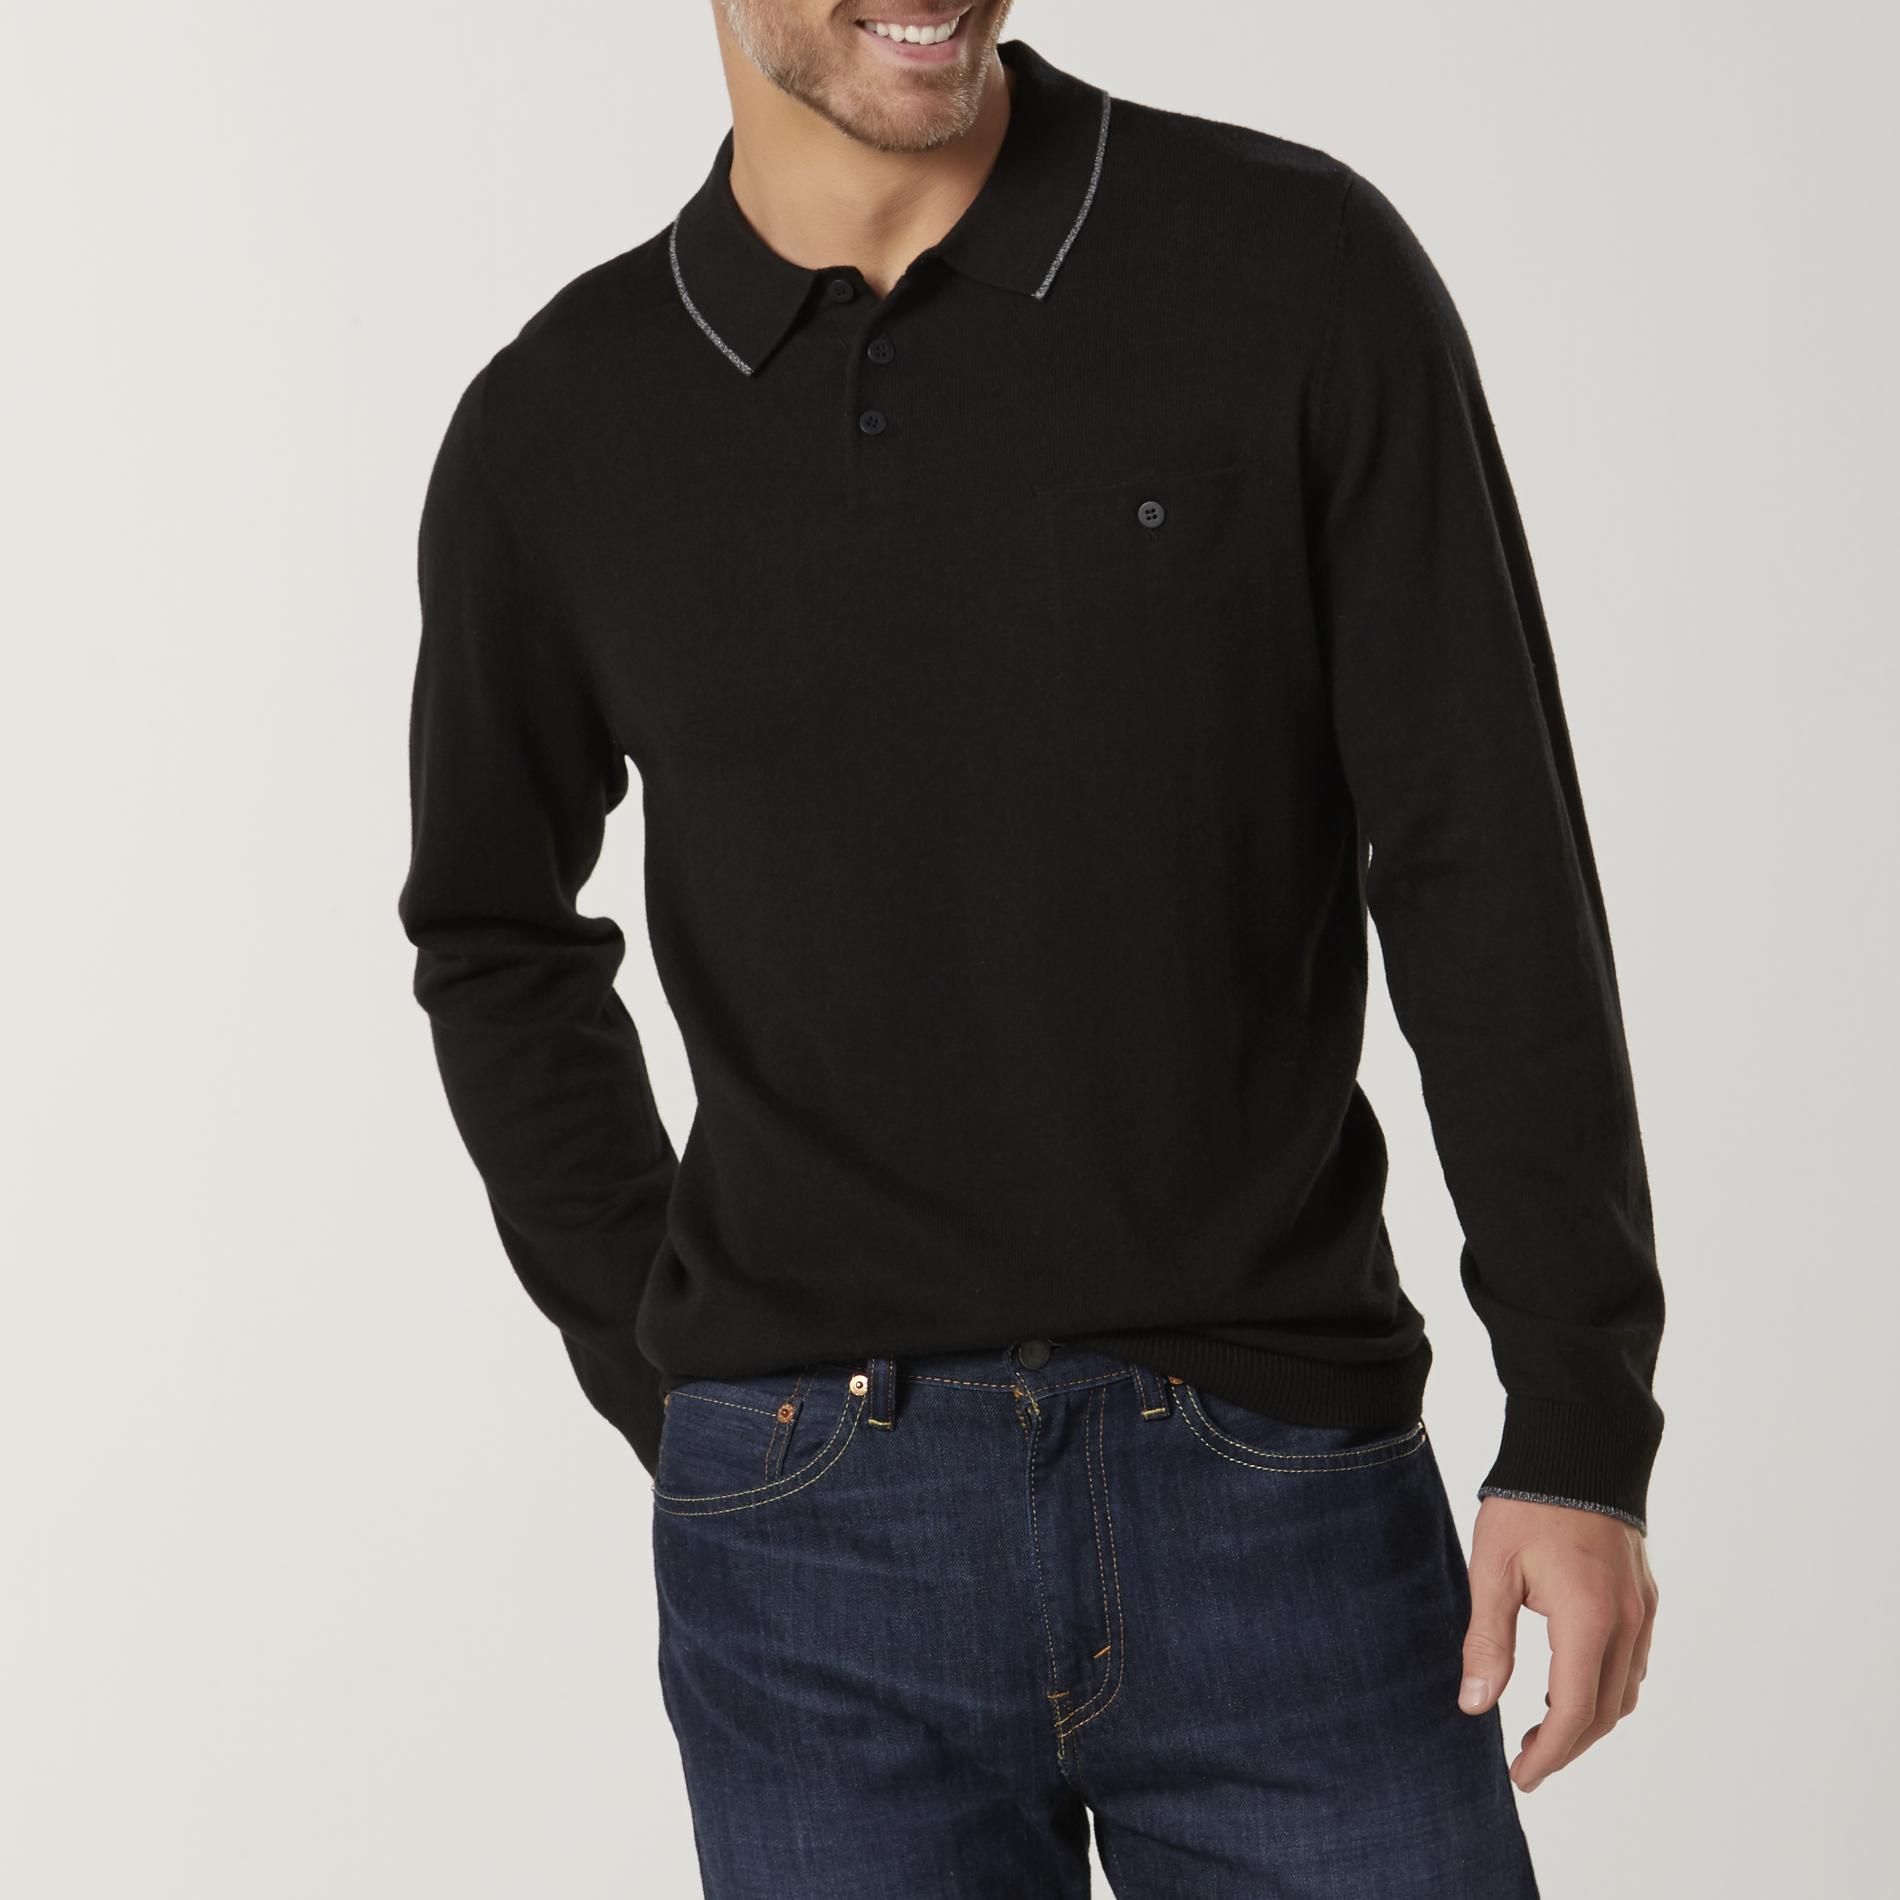 Structure Men's Slim Fit Polo Sweater